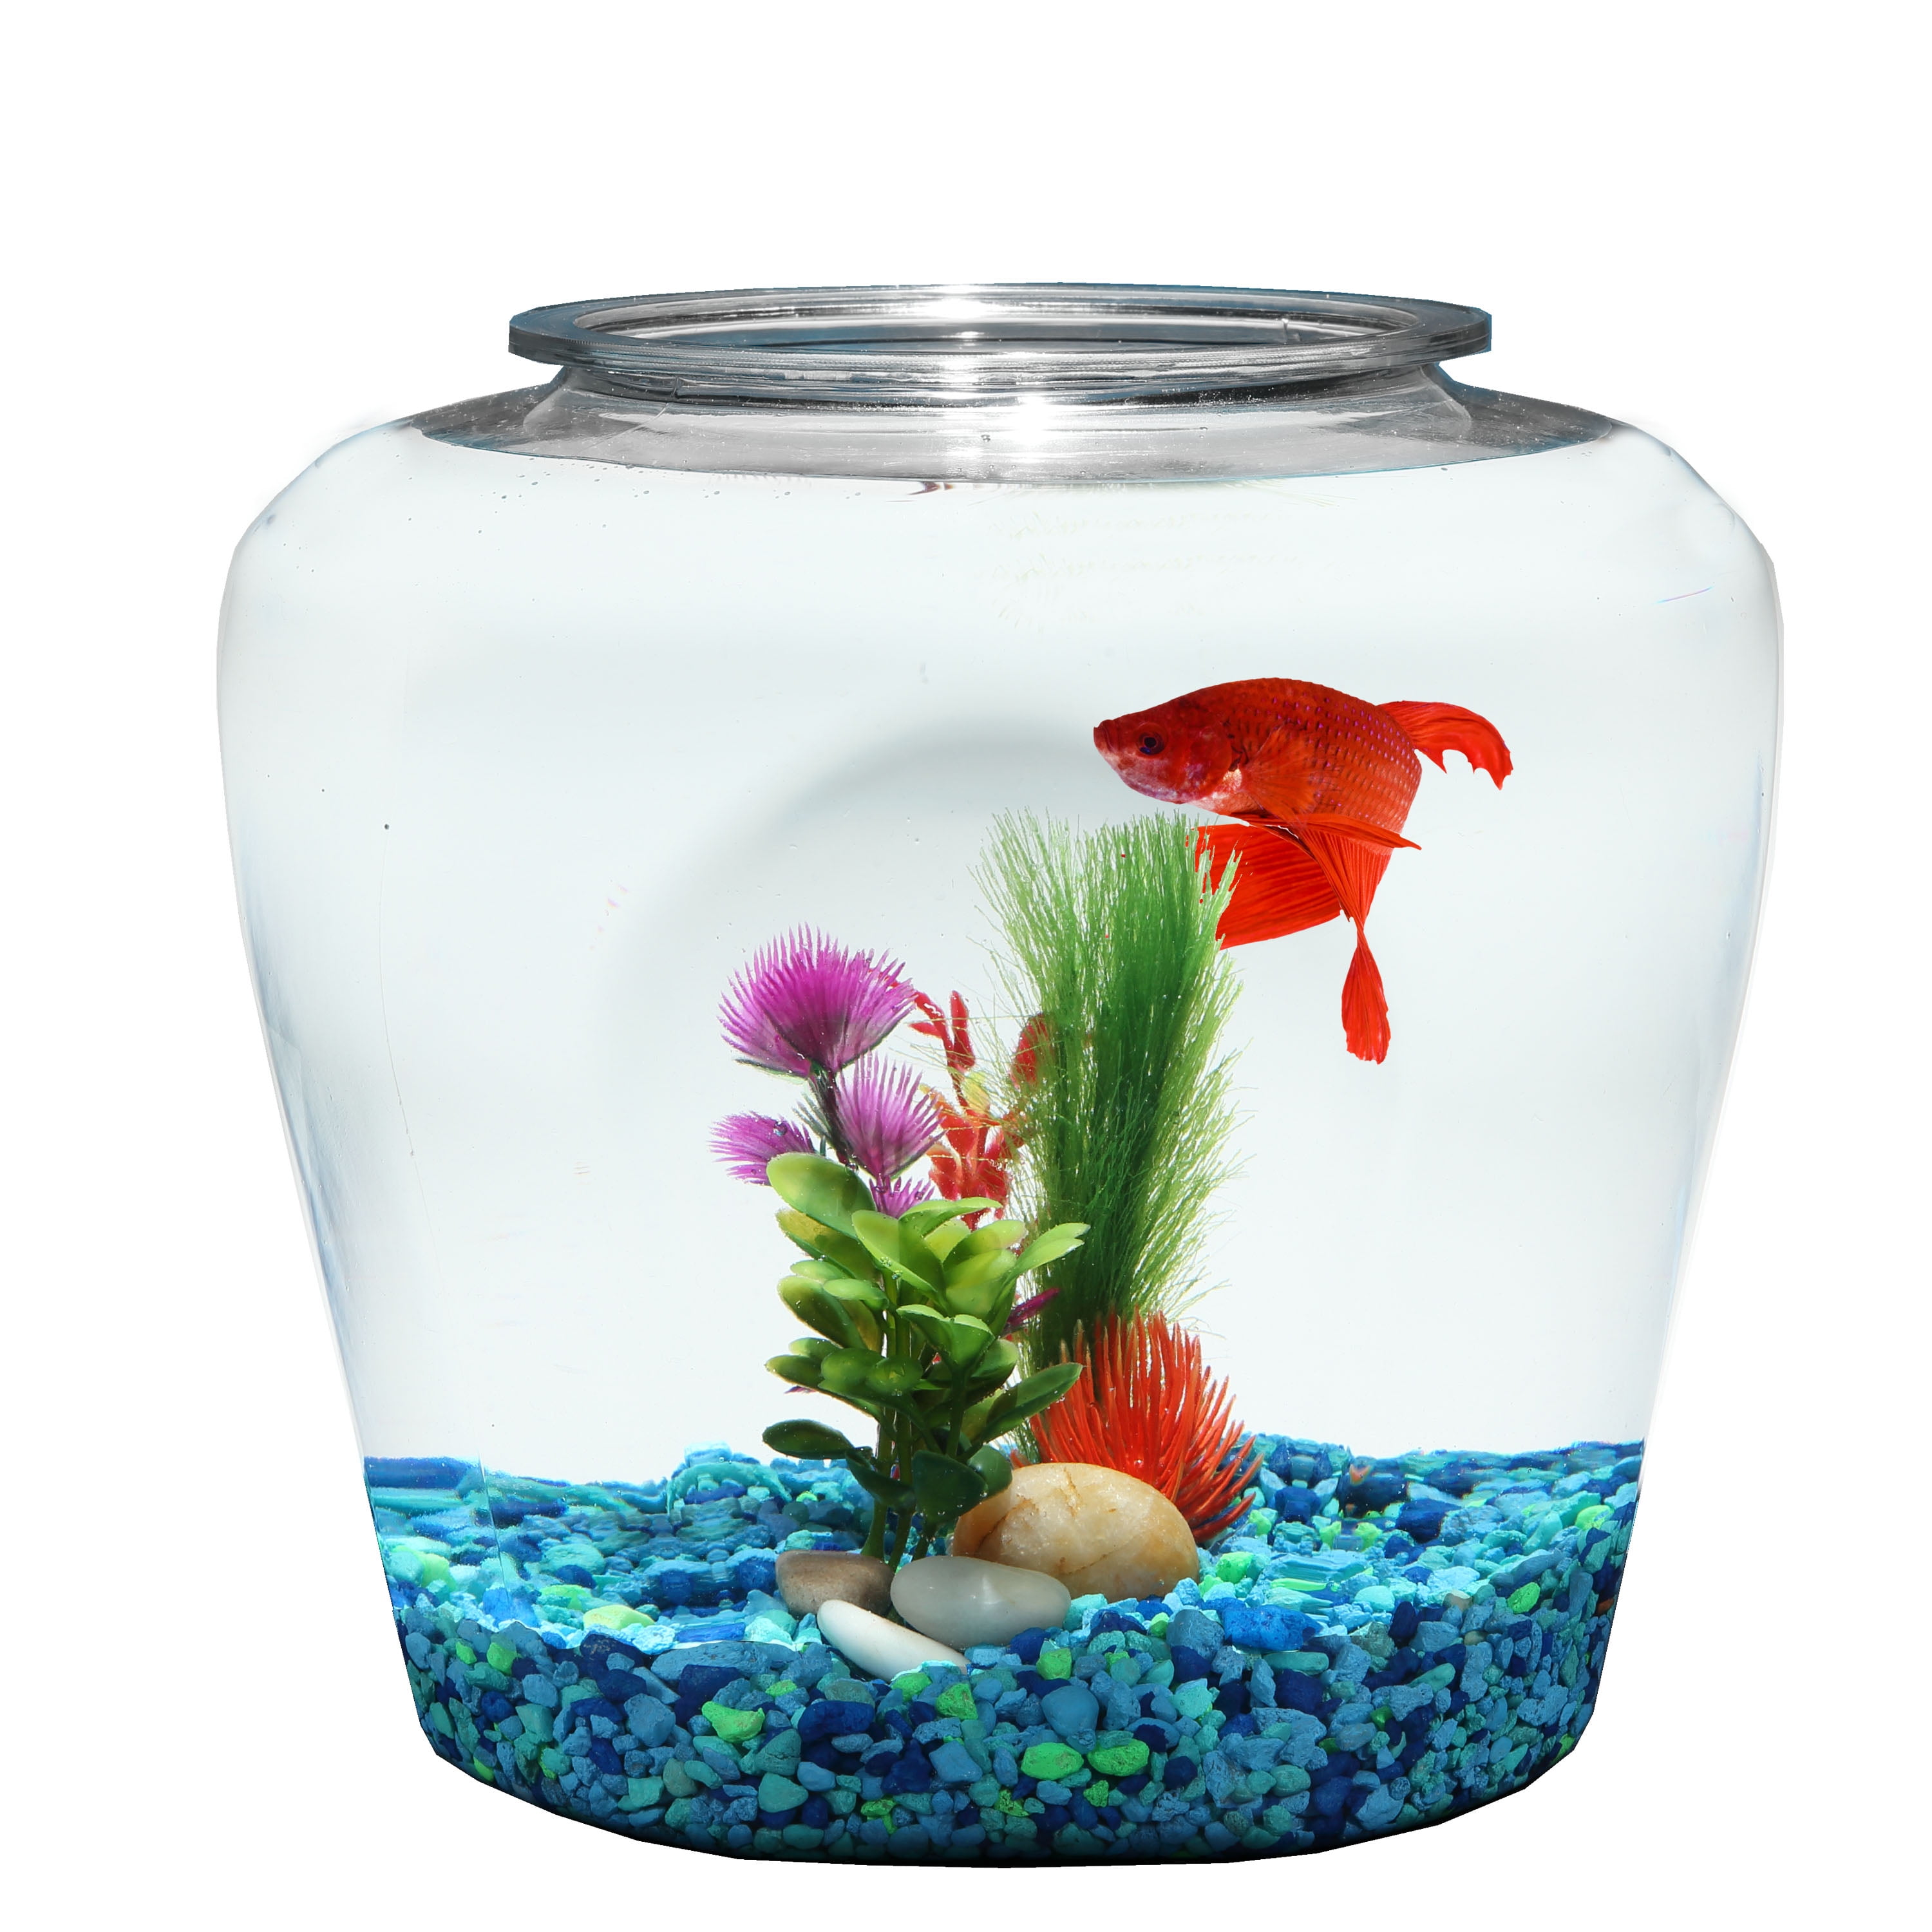 2-gallon fish bowl is perfect for your favorite betta or fill with fresh fl...